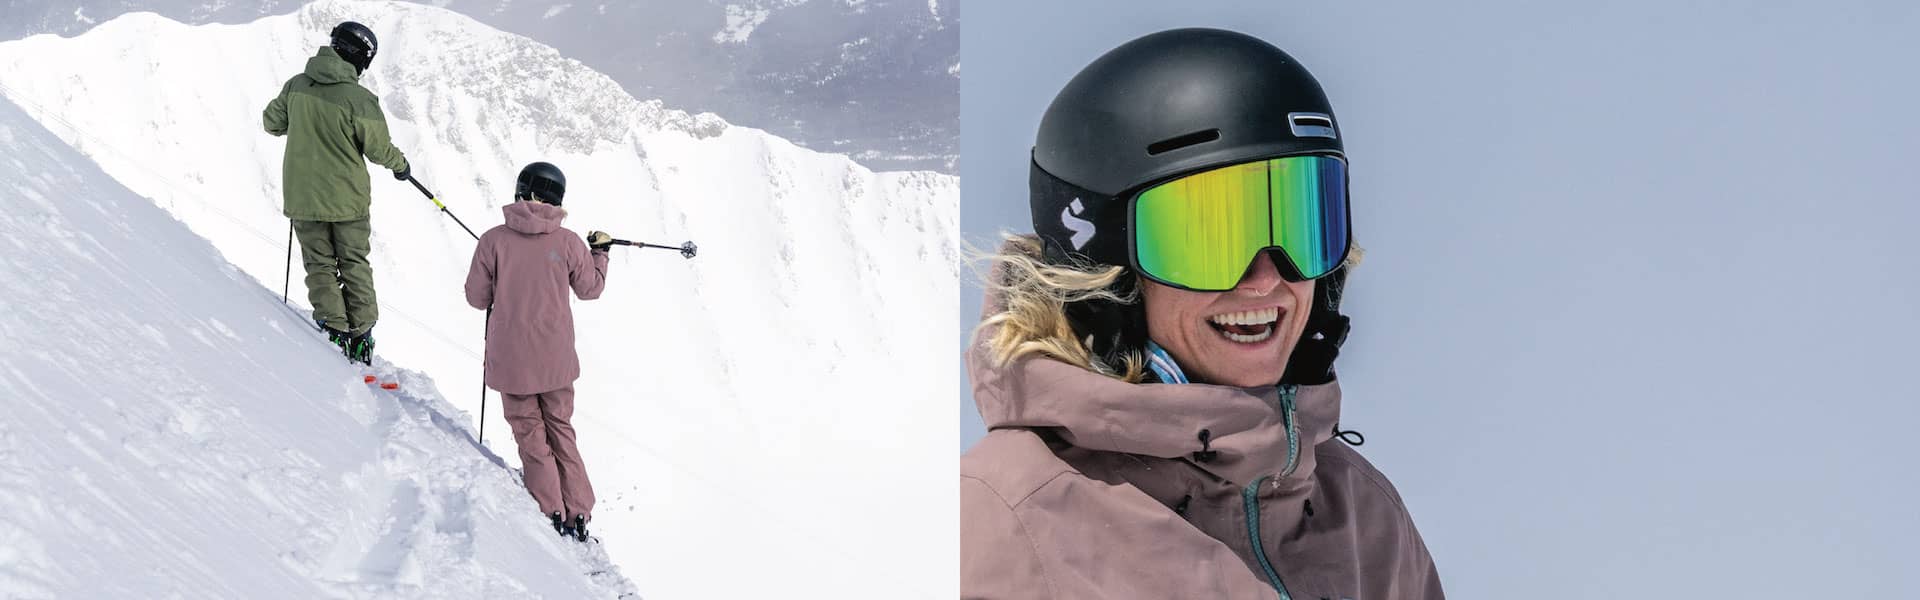 Side by side images of two skiers pointing at an object in the distance and one of the skiers in powder